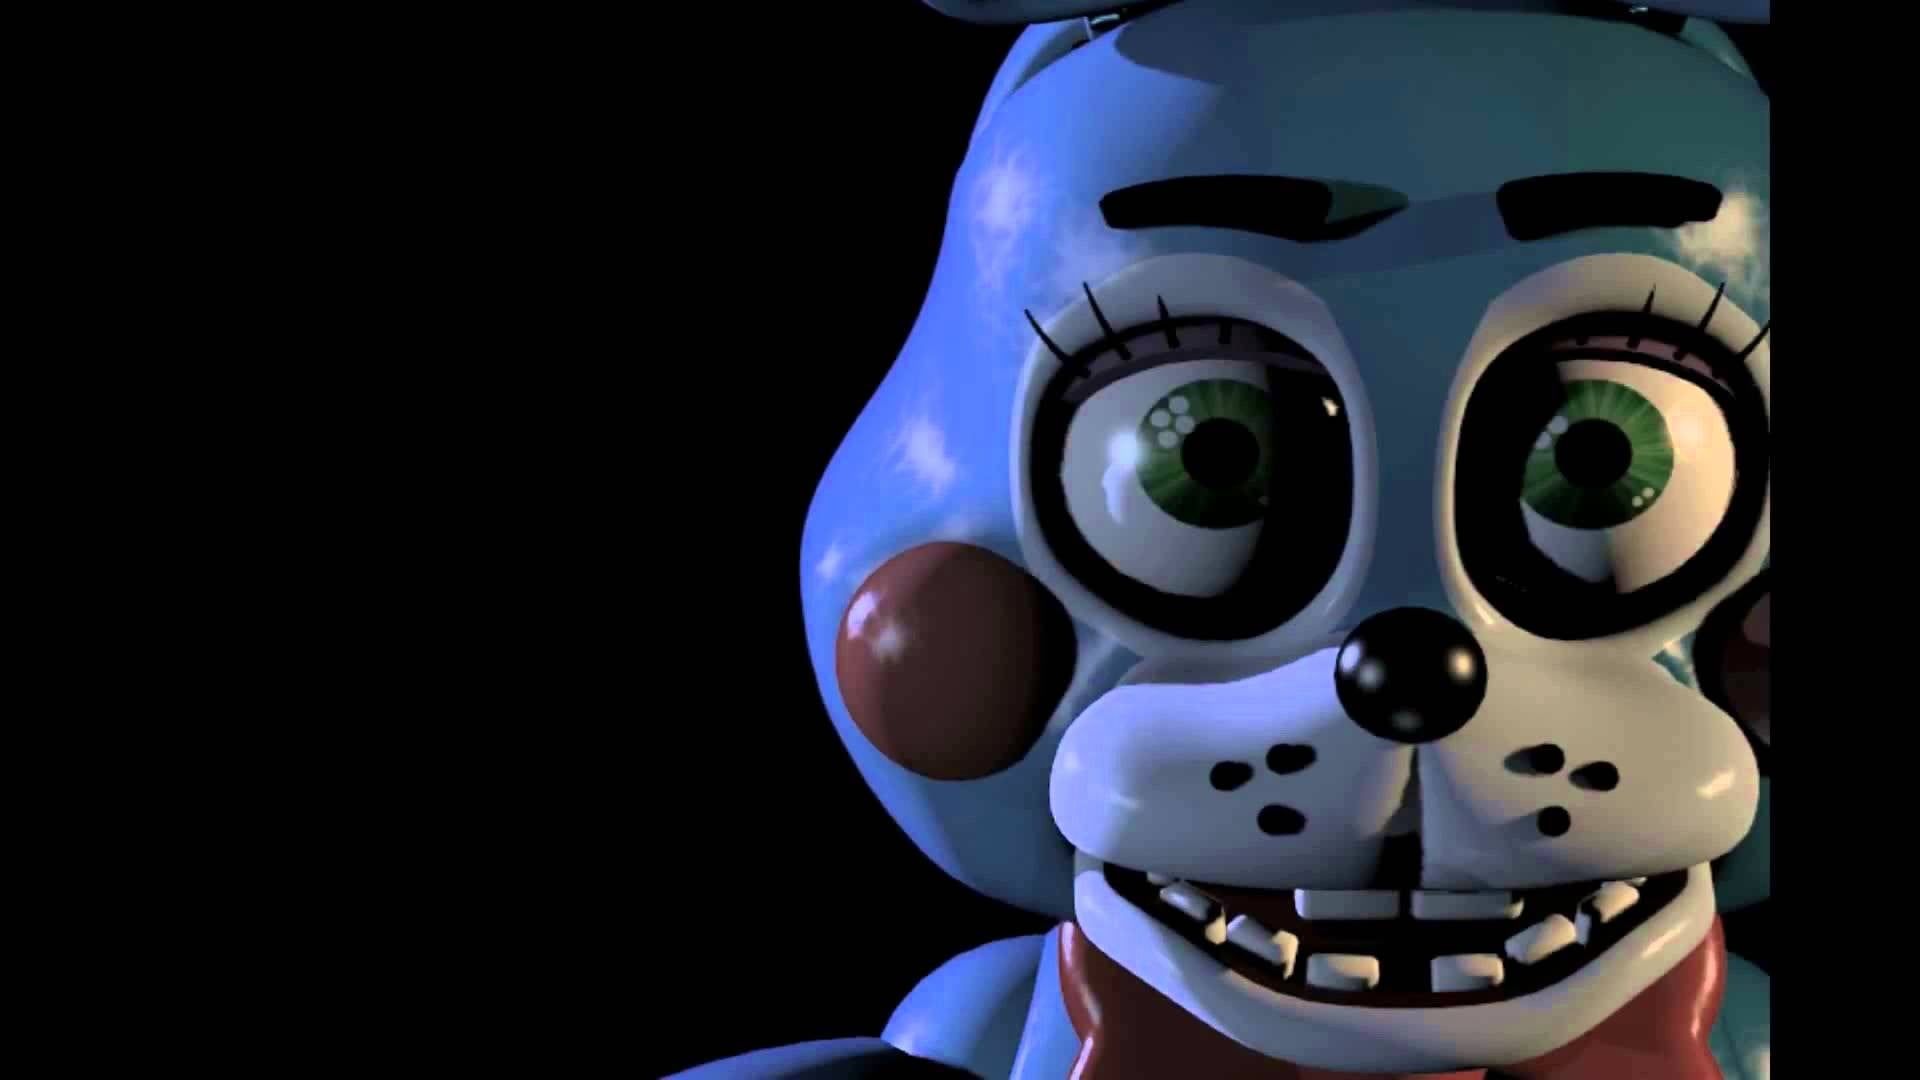 Blue and white 5 nights at Freddy's character HD wallpapers.